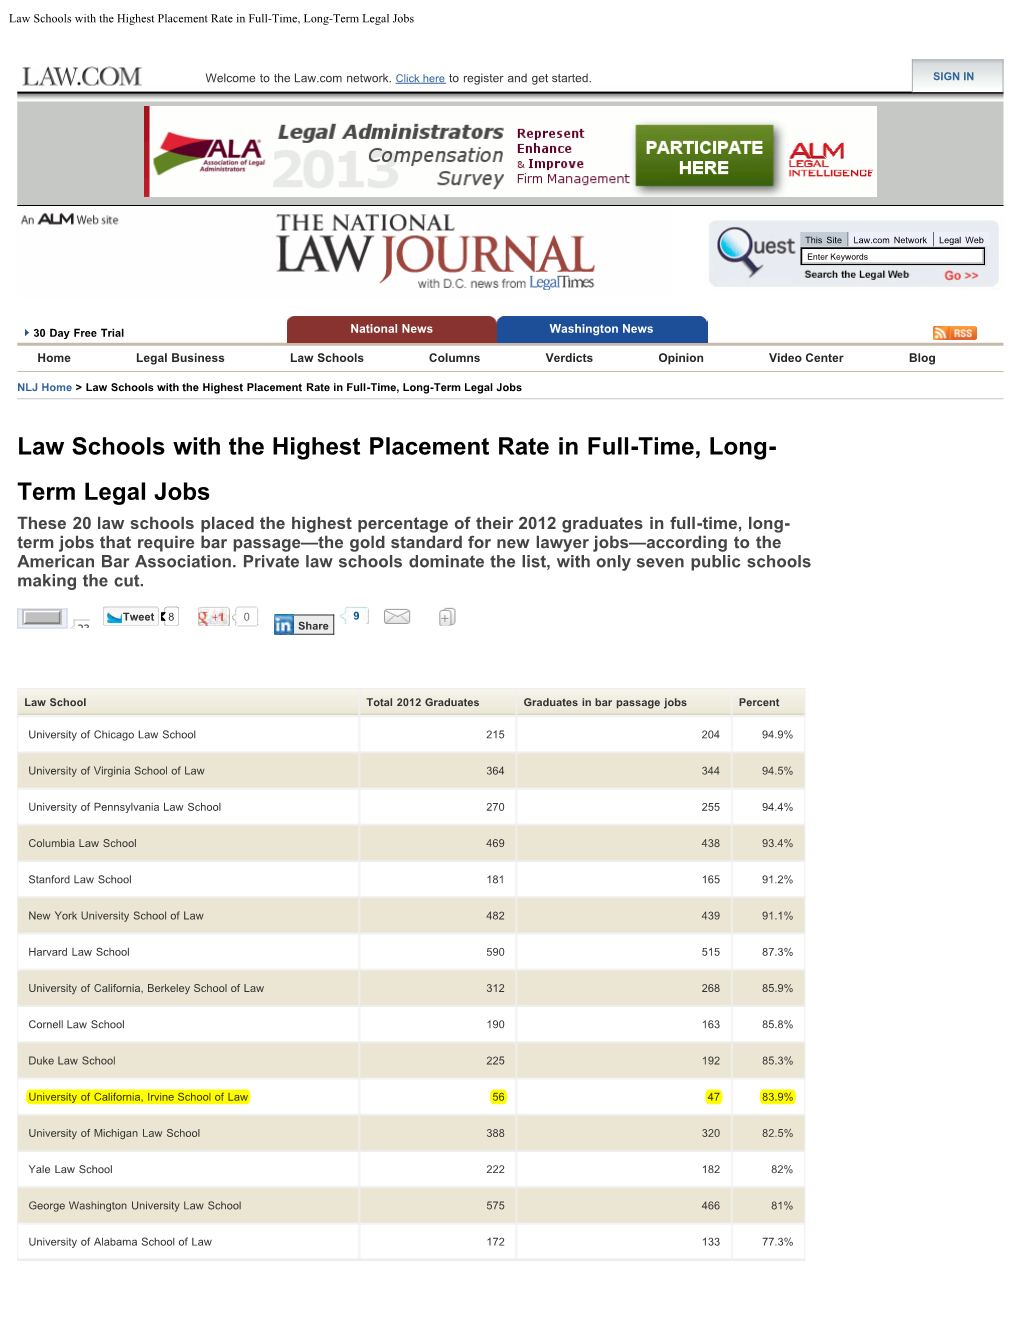 Law Schools with the Highest Placement Rate in Full-Time, Long-Term Legal Jobs